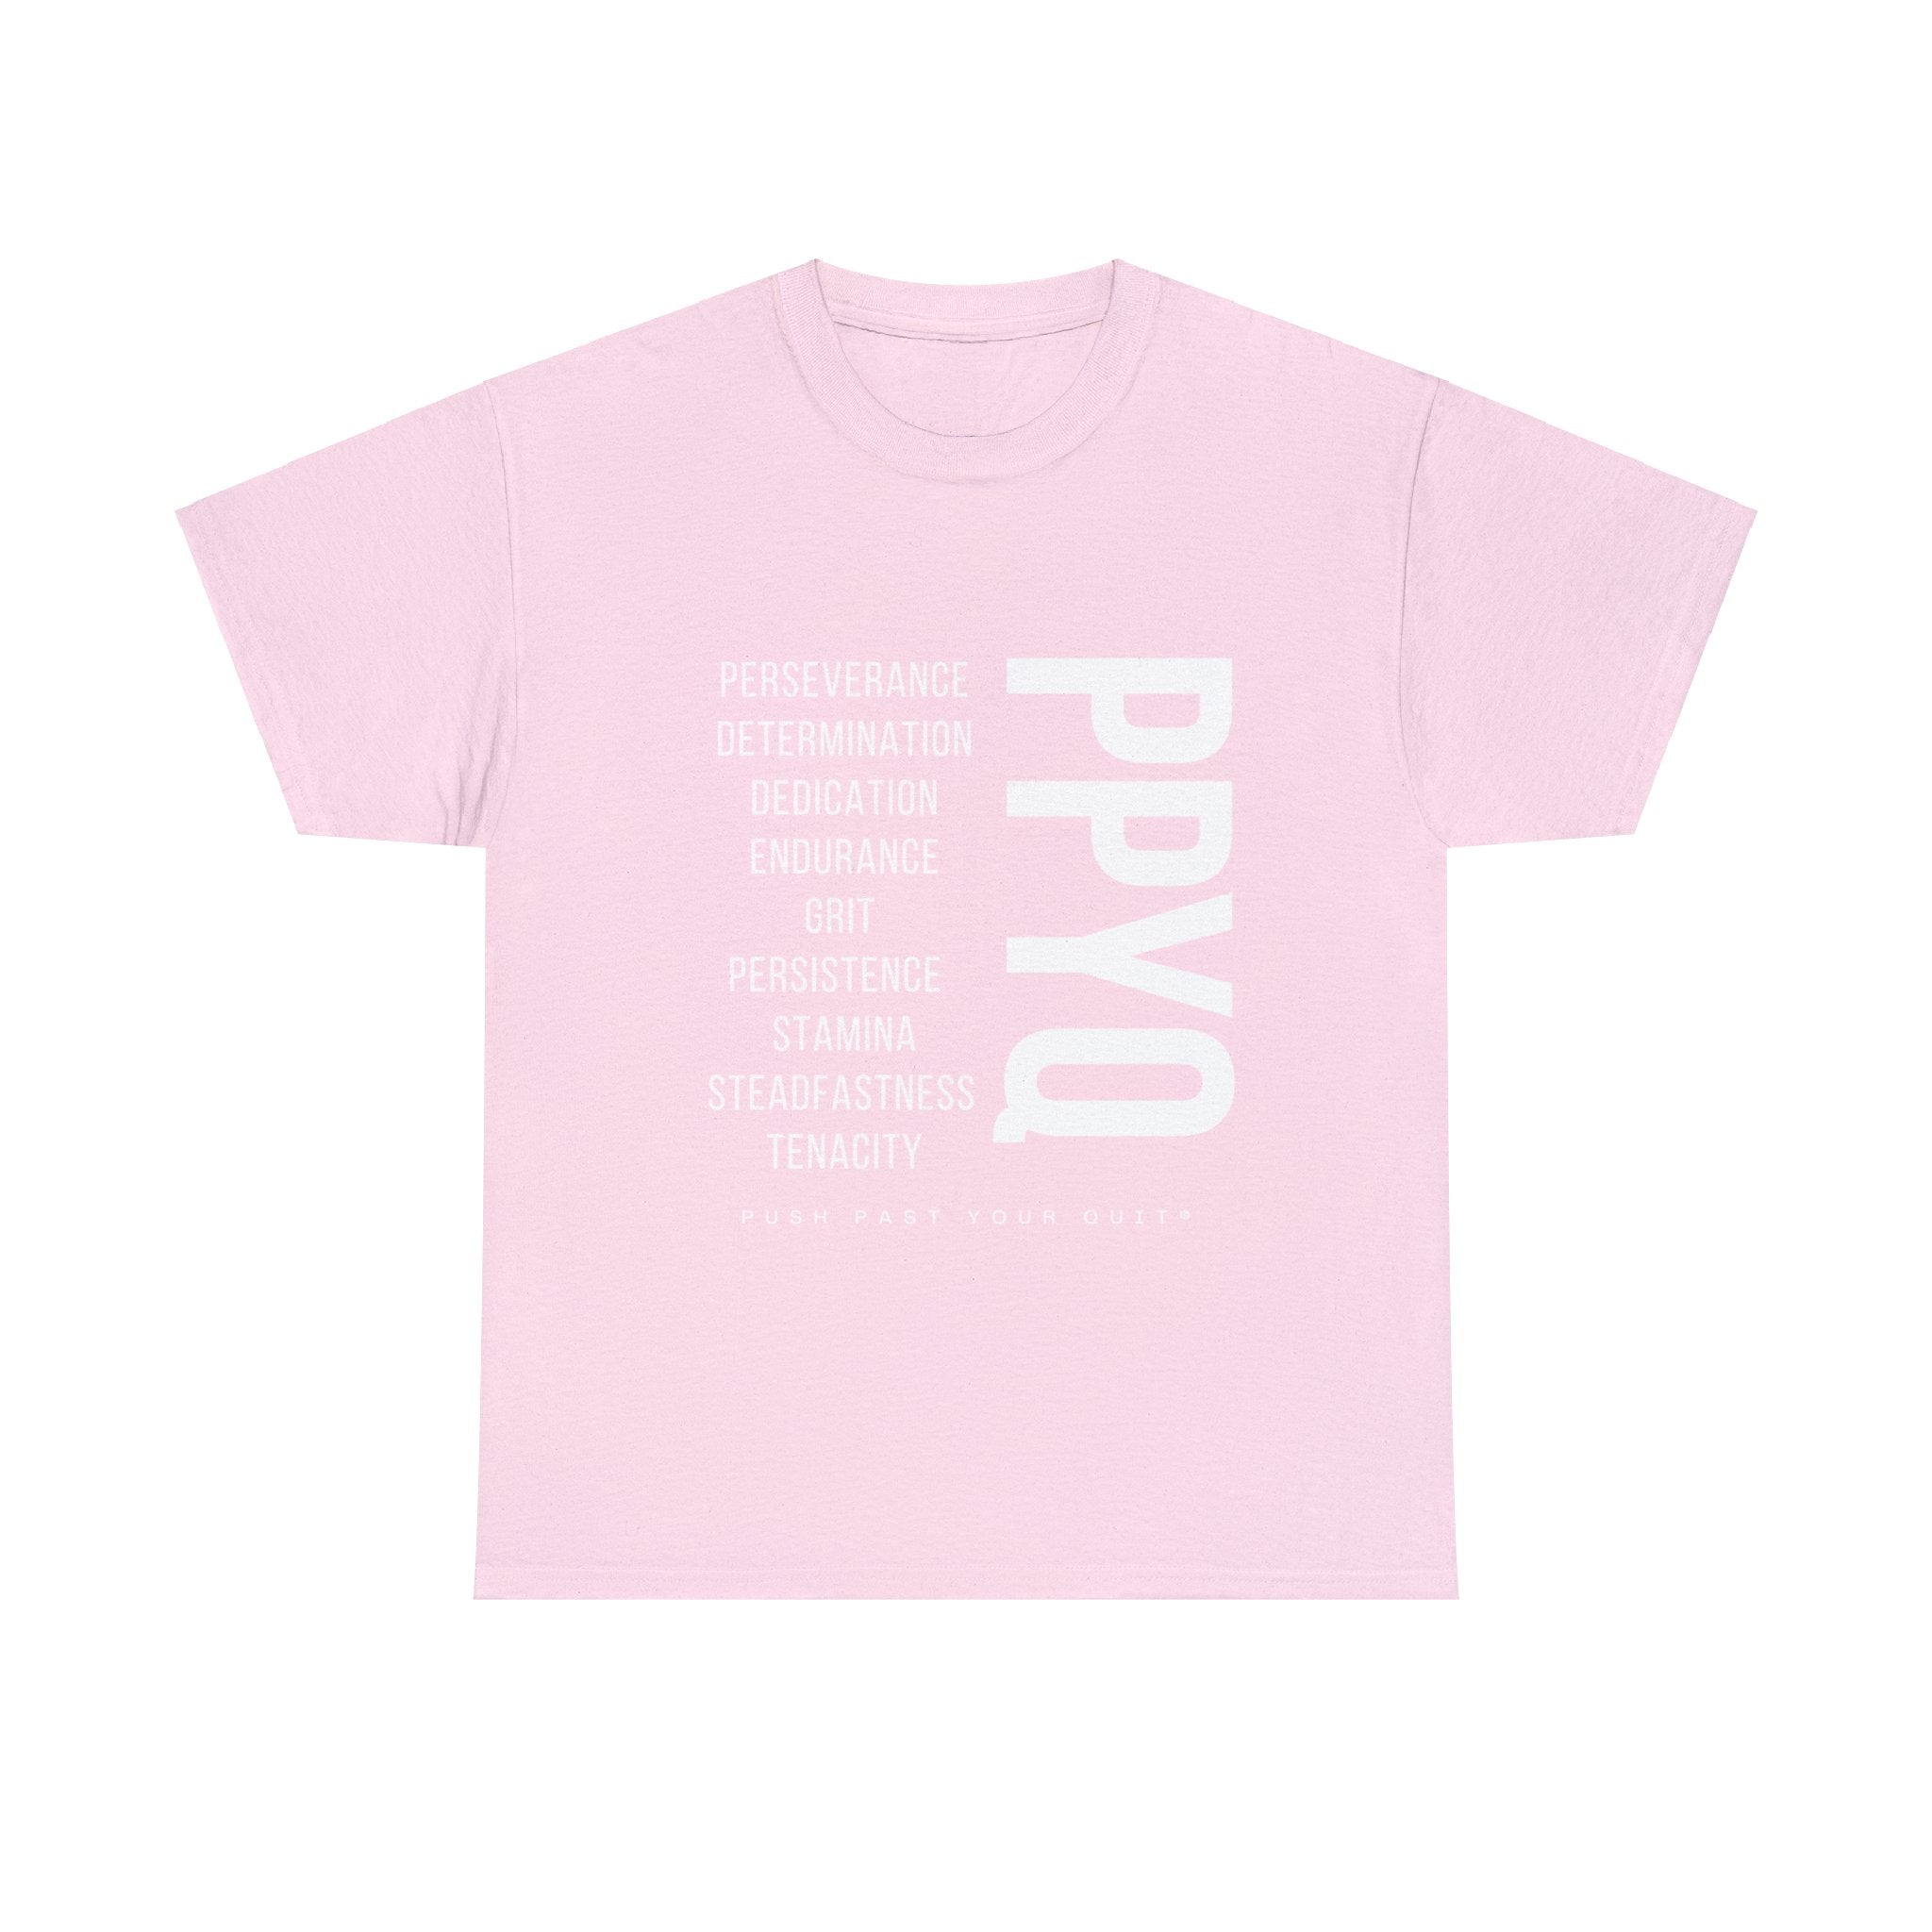 PPYQ® Defined Tee